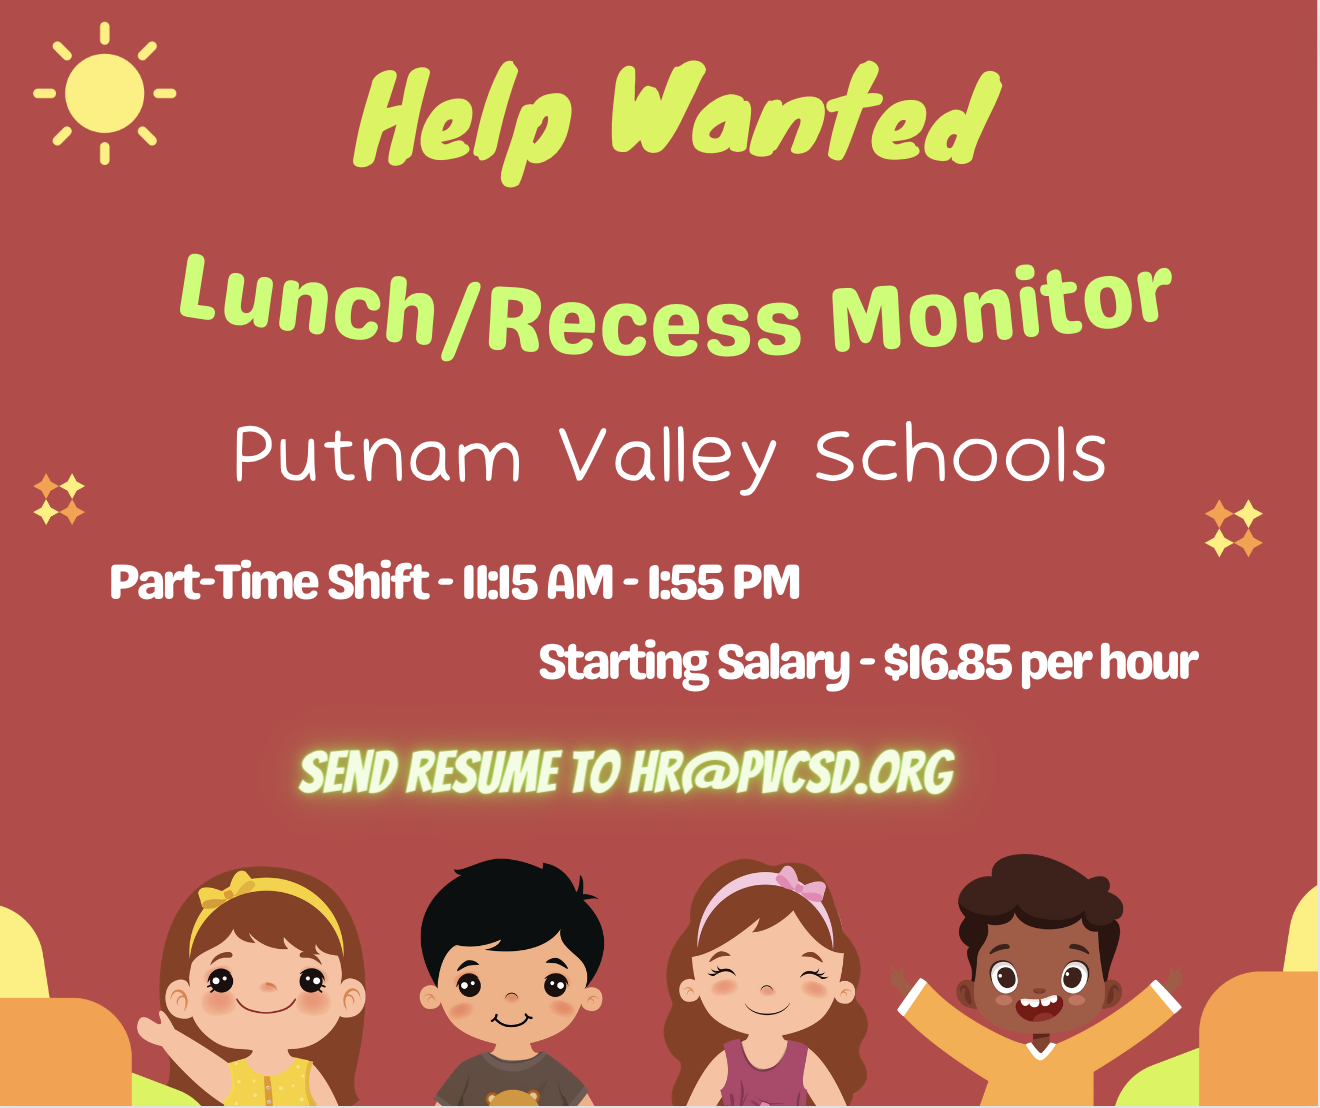 Help Wanted
Lunch/Recess Monitor
Putnam Valley Schools
Part-Time Shift - 11:15 AM - 1:55 PM
Starting Salary - $16.85 per hour
SEND RESUME TO HR@PVCSD.ORG